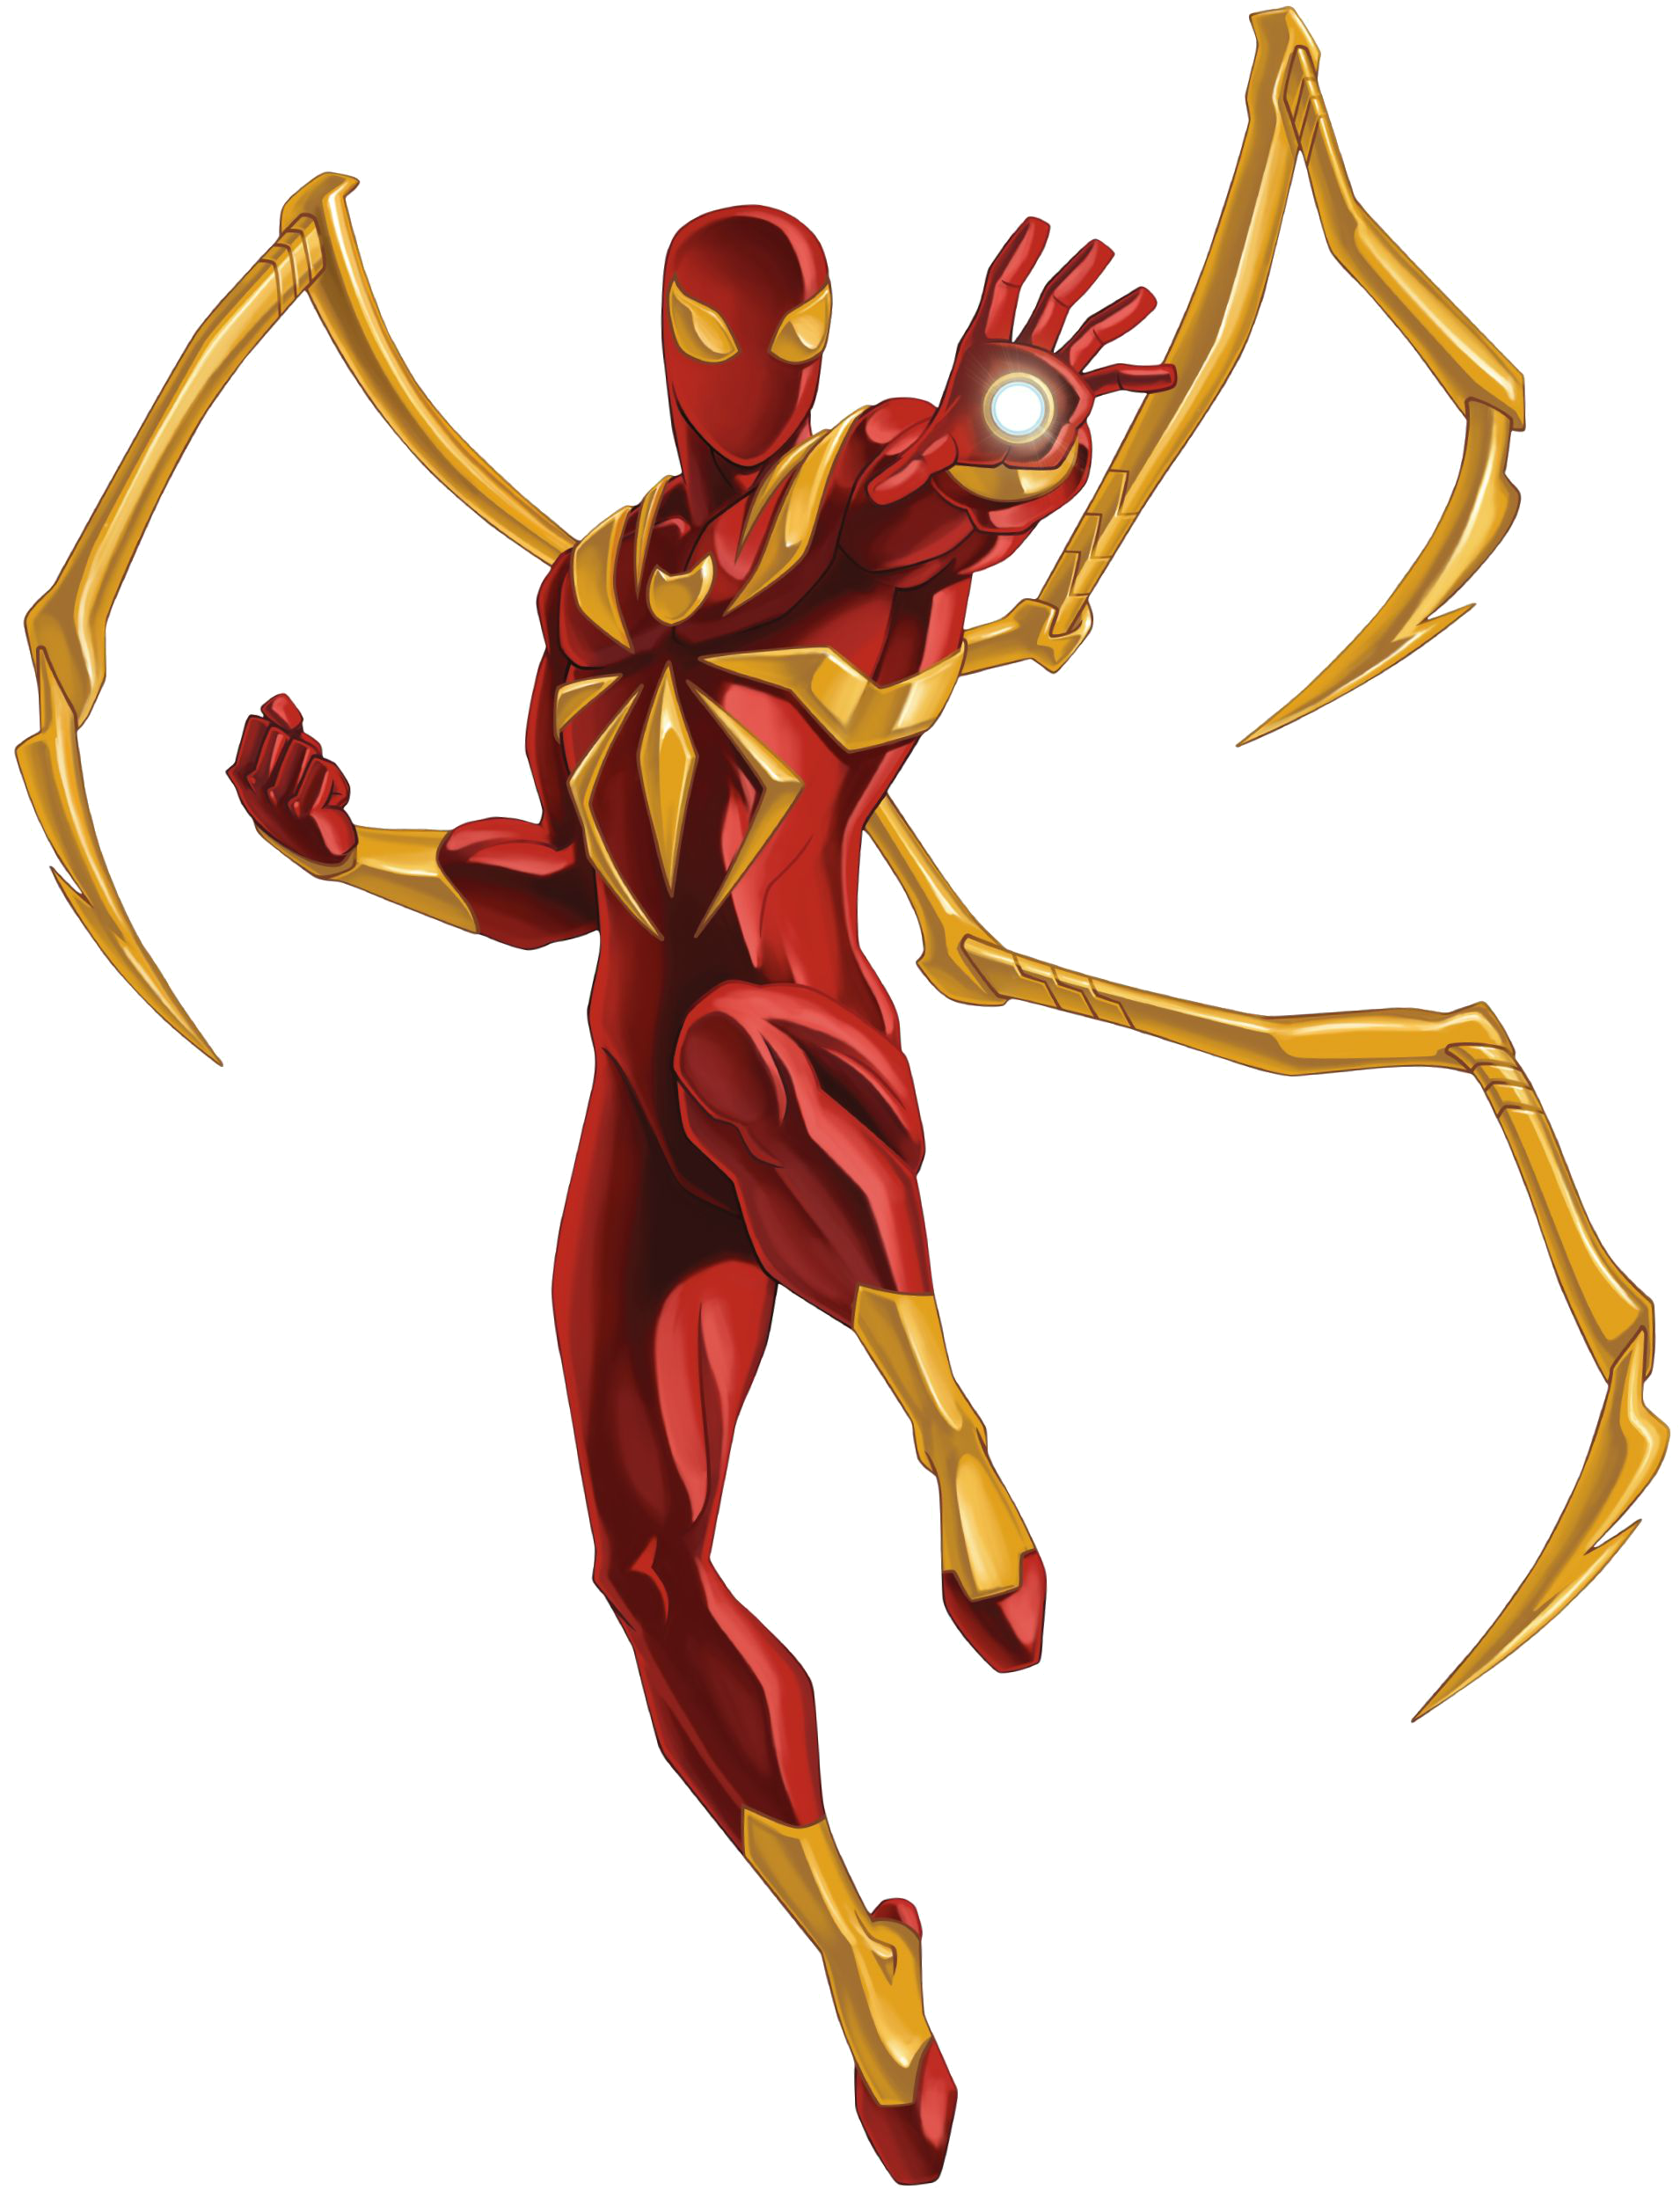 Red and Gold Iron Spider Suit Collectible | BigBadToyStore